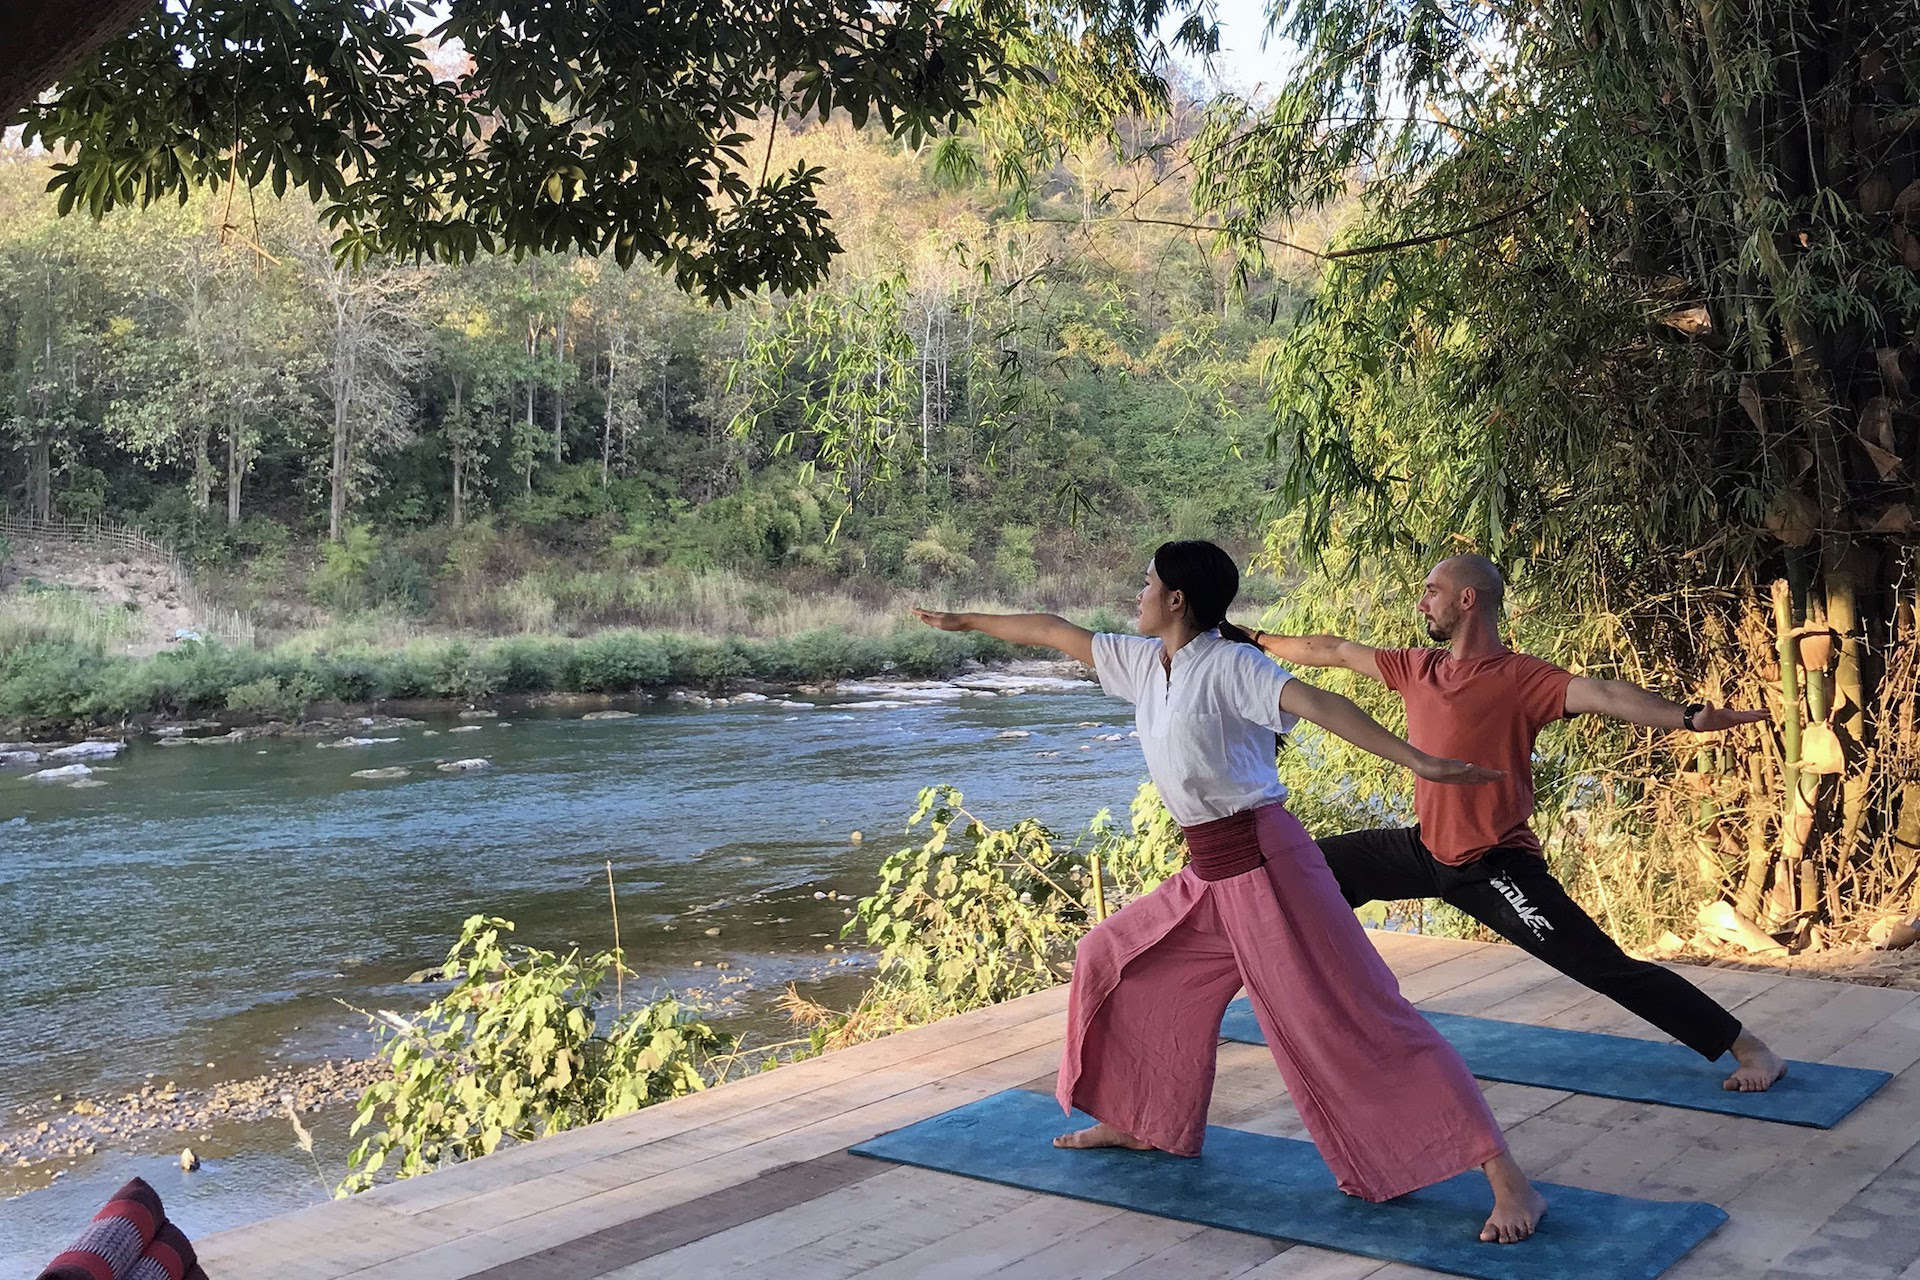 Two people practicing yoga on a wooden deck near a river in Luang Prabang.